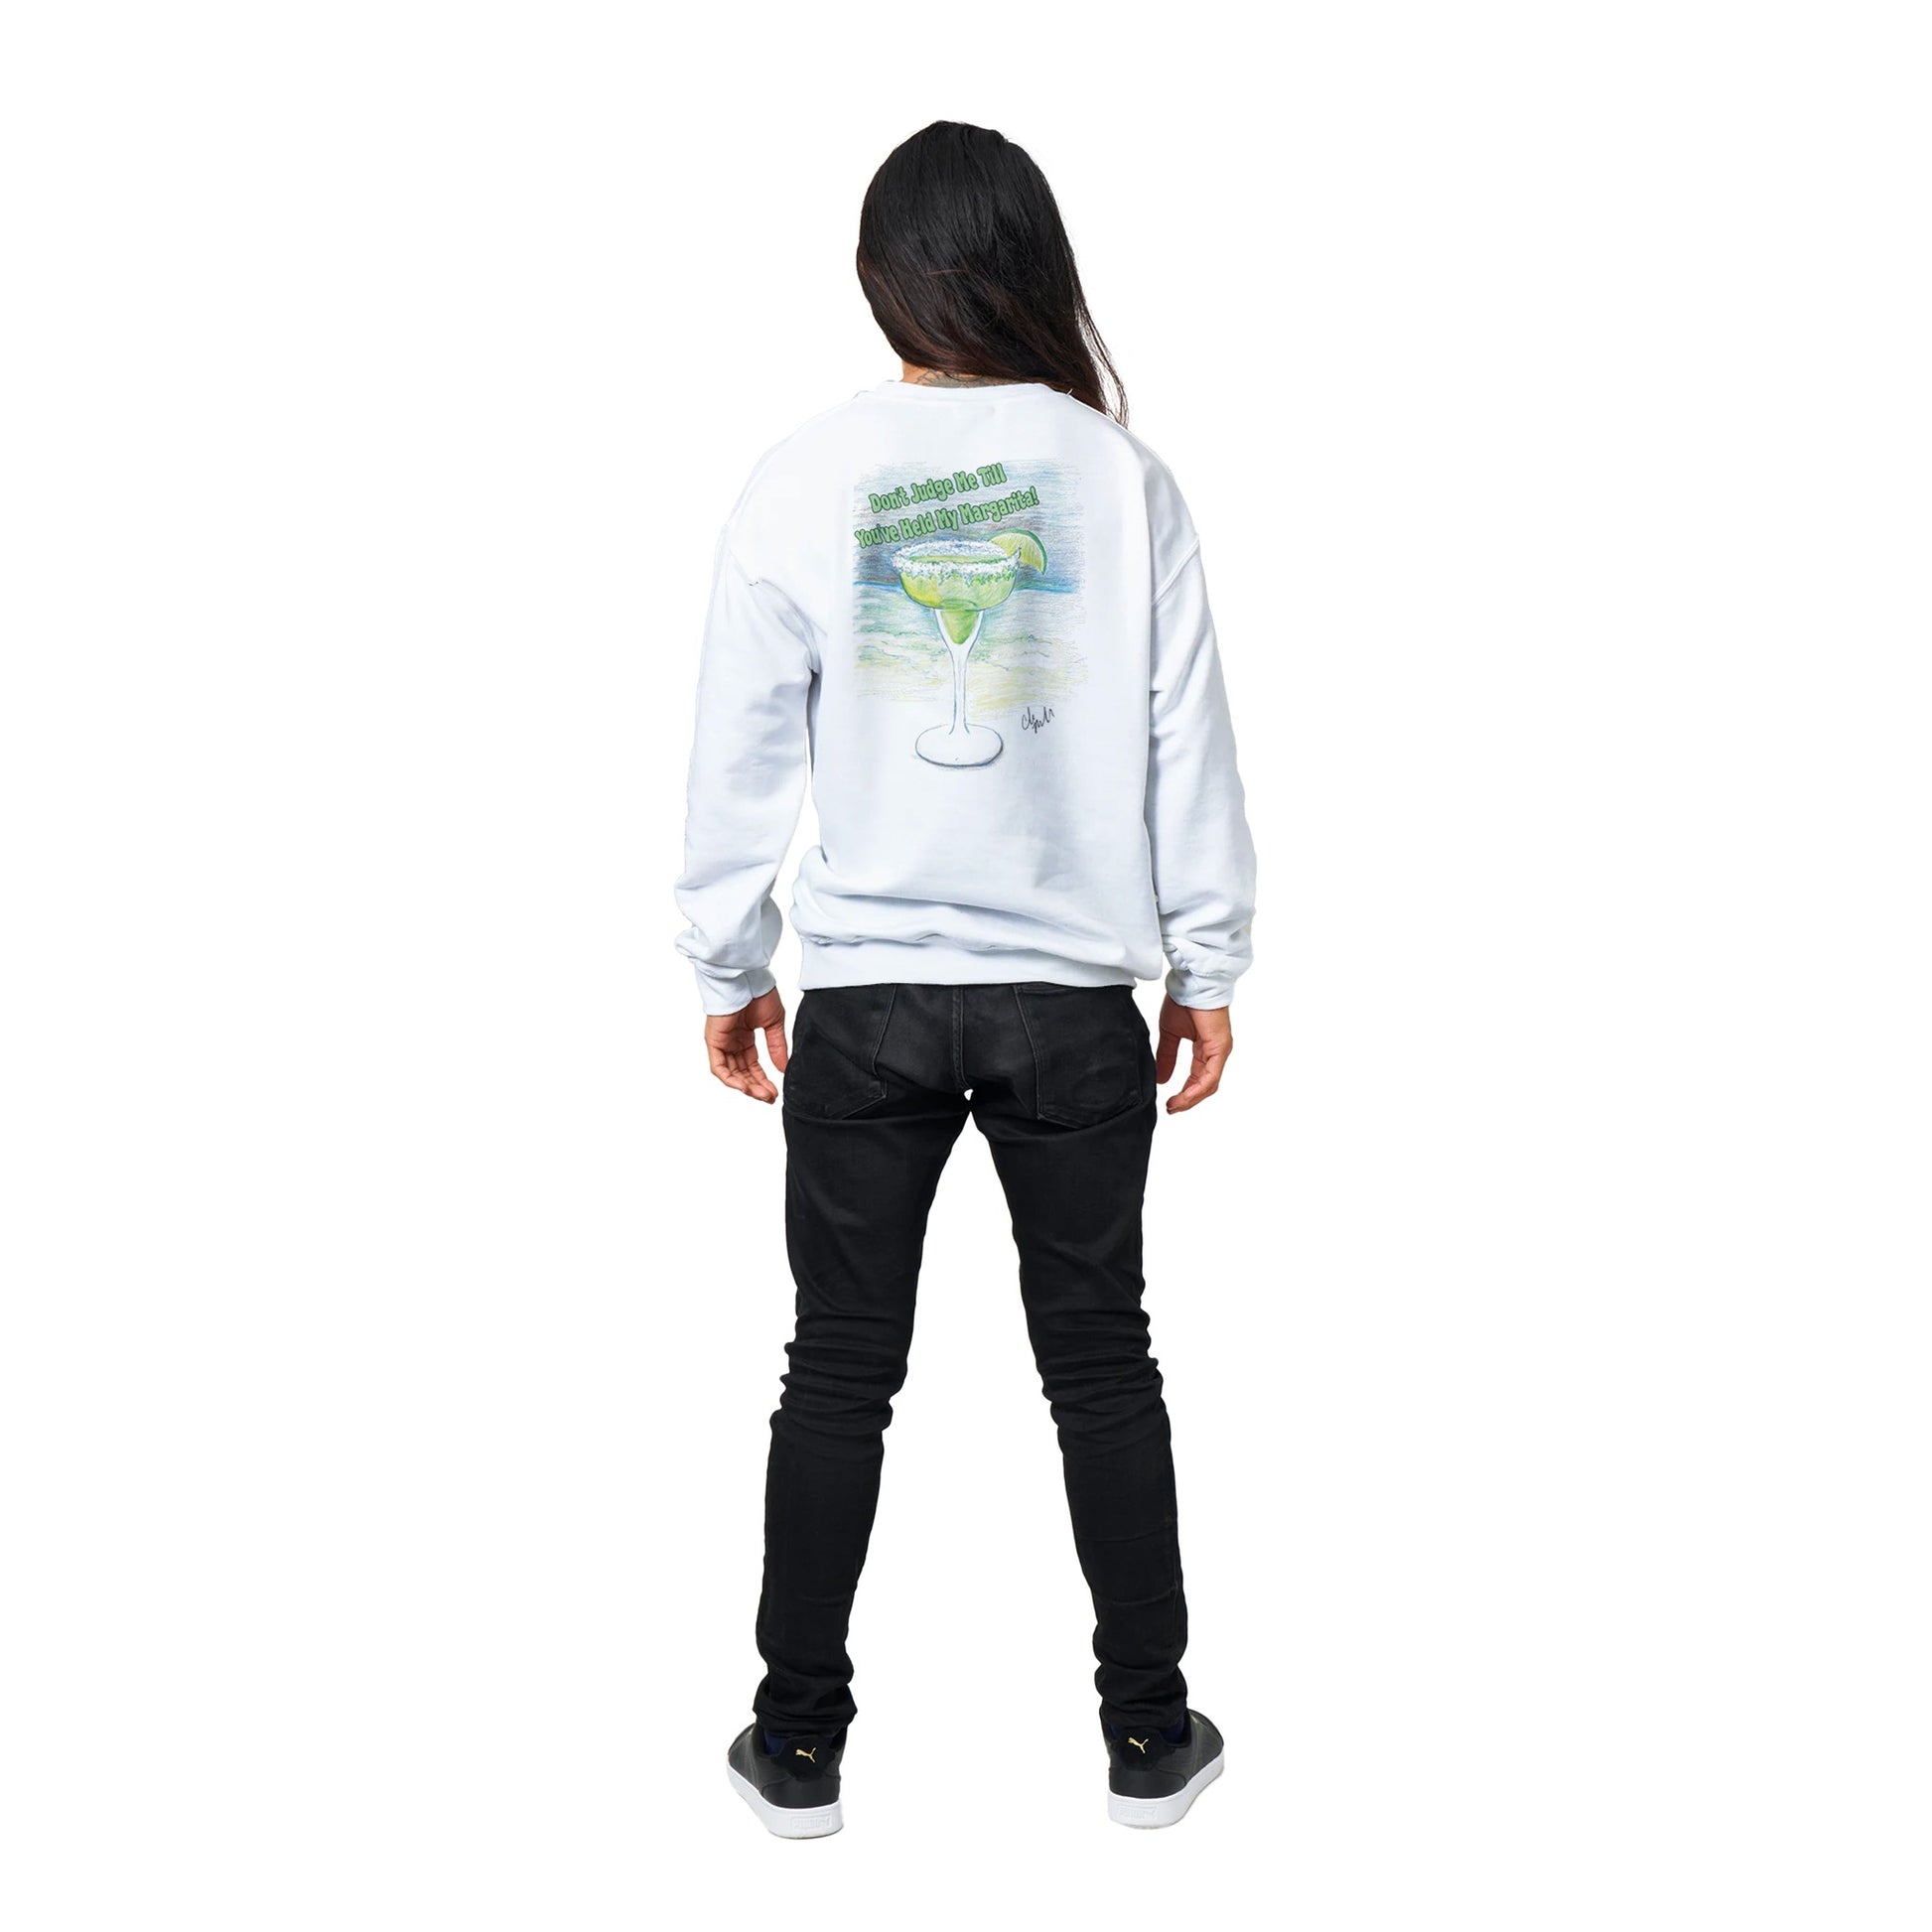 Standing long black-haired male model wearing a white Classic Unisex Crewneck sweatshirt with original artwork and motto Don’t Judge Me Till You’ve Held my margarita on back and Whatya Say logo on front from WhatYa Say Apparel rear view.